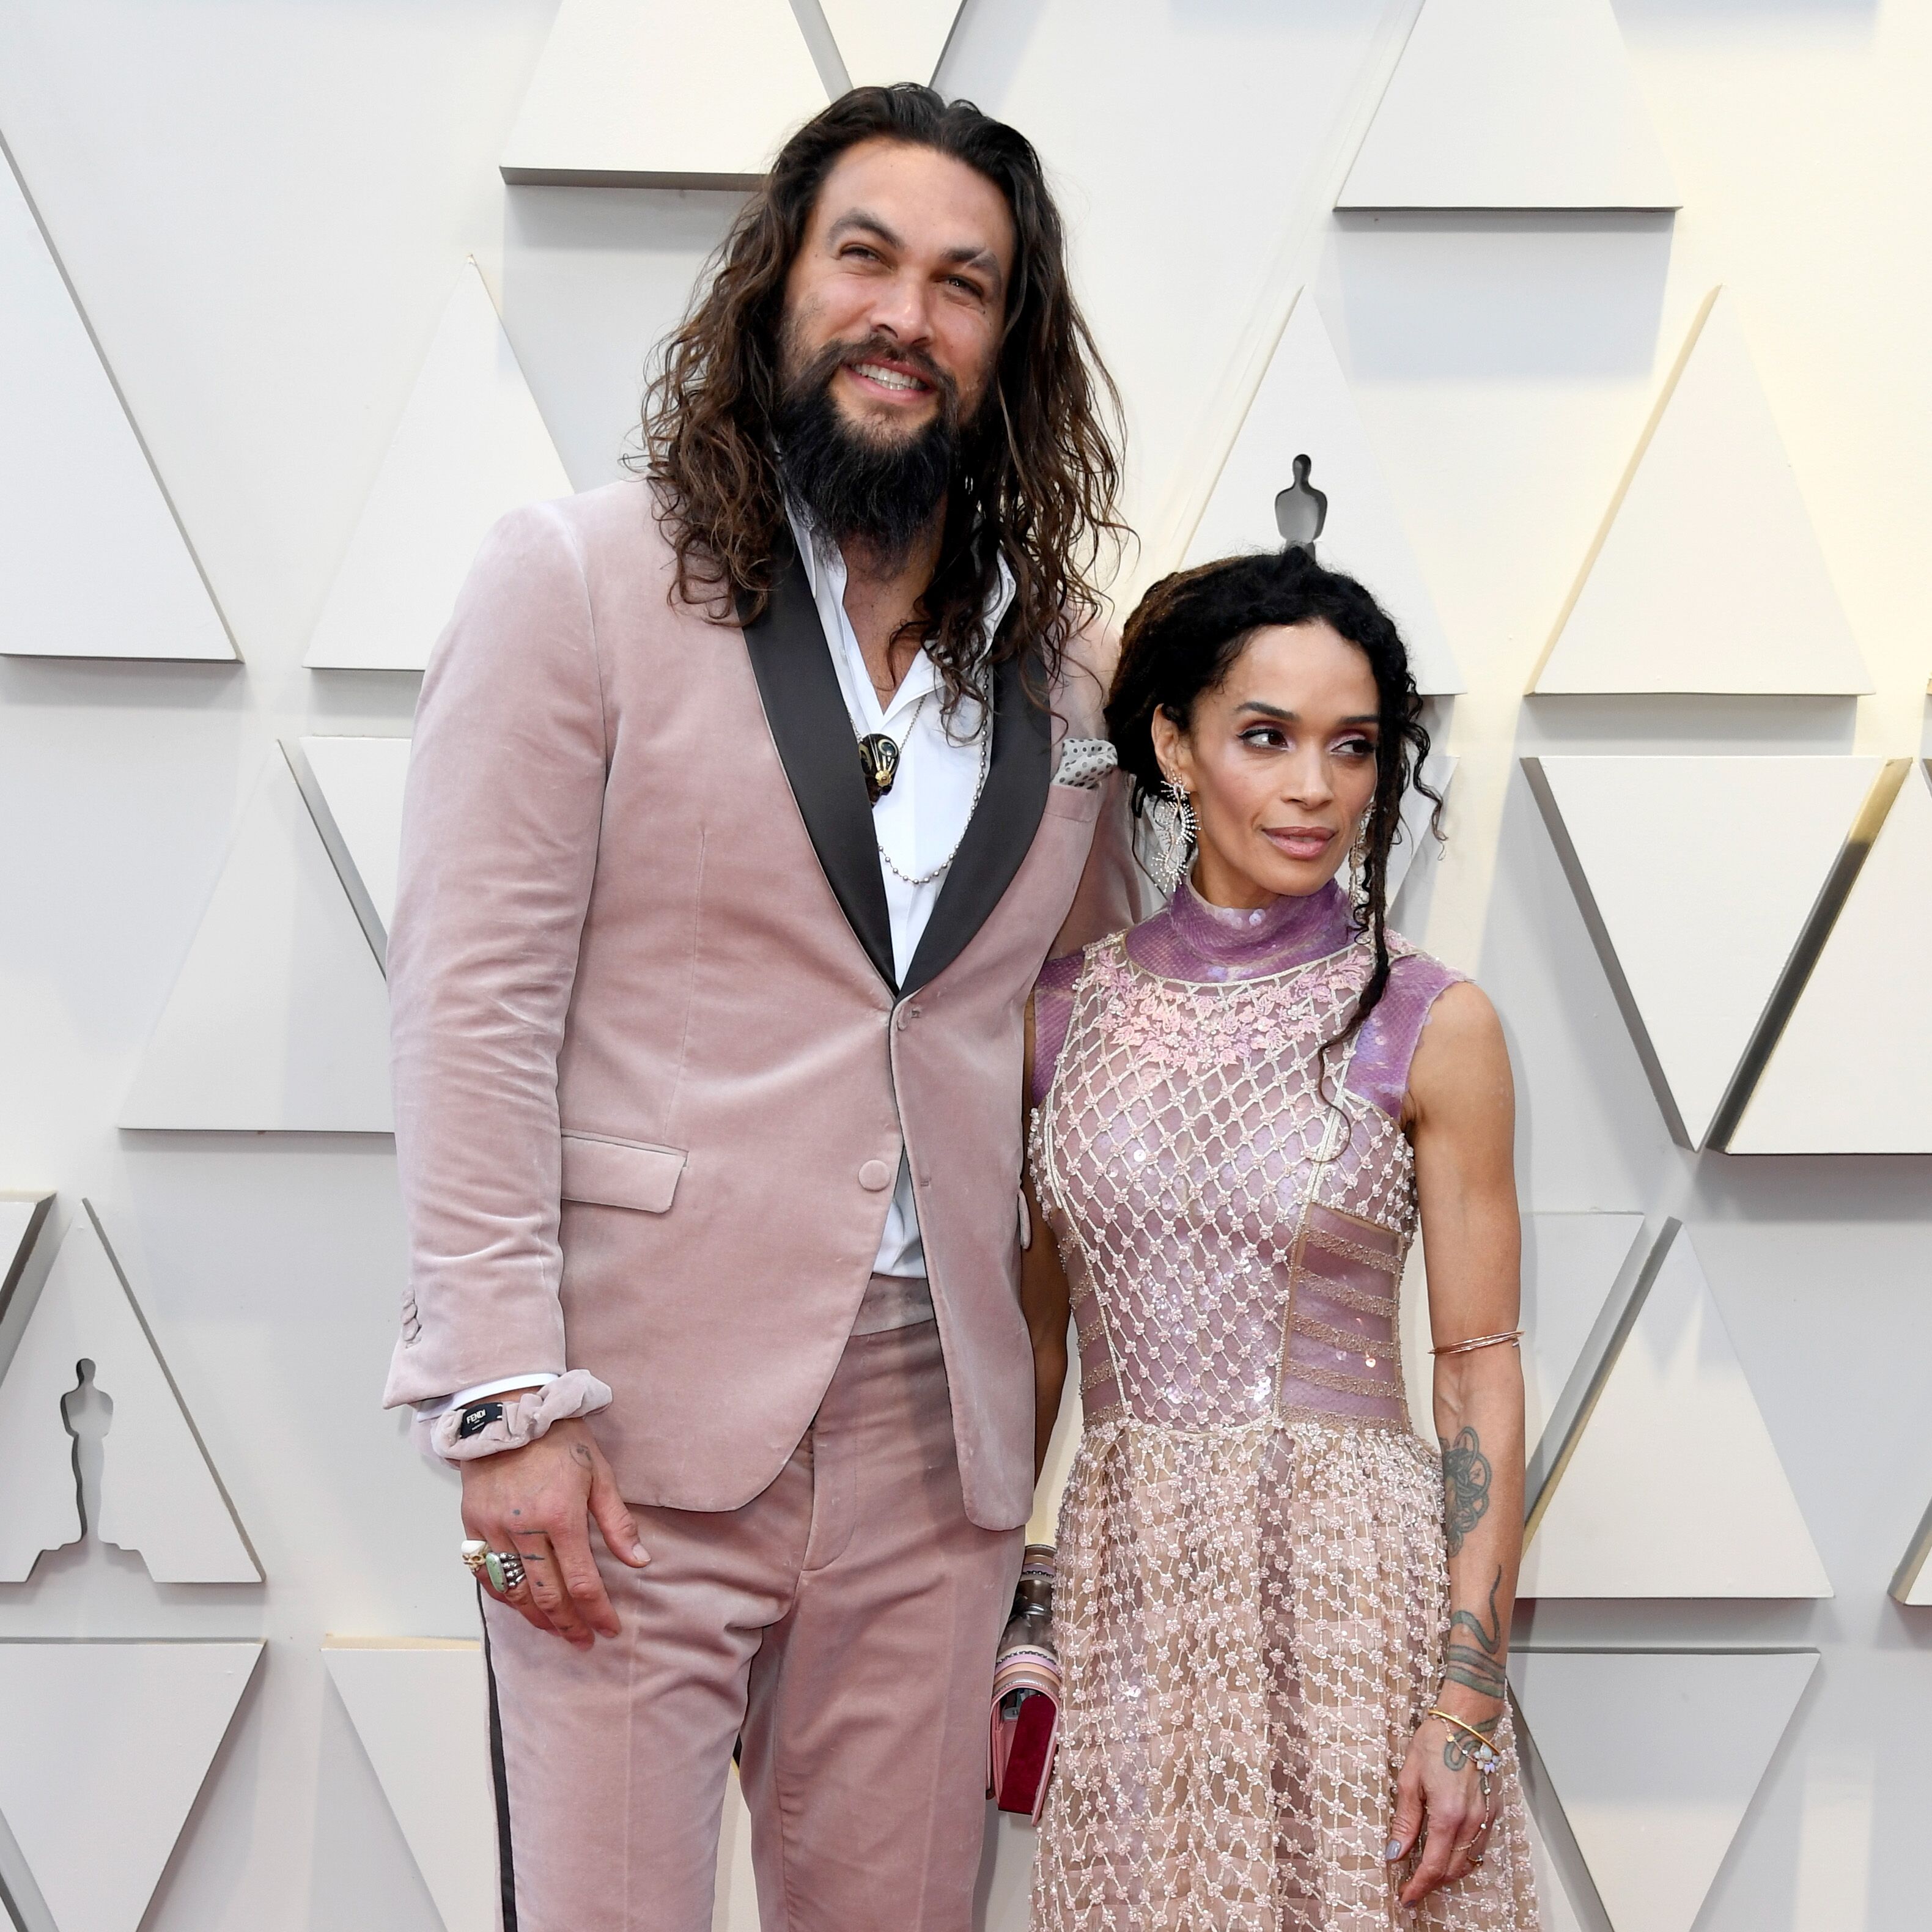 Jason Momoa and his wife, Lisa Bonet, in a red carpet event. | Source: Getty Images